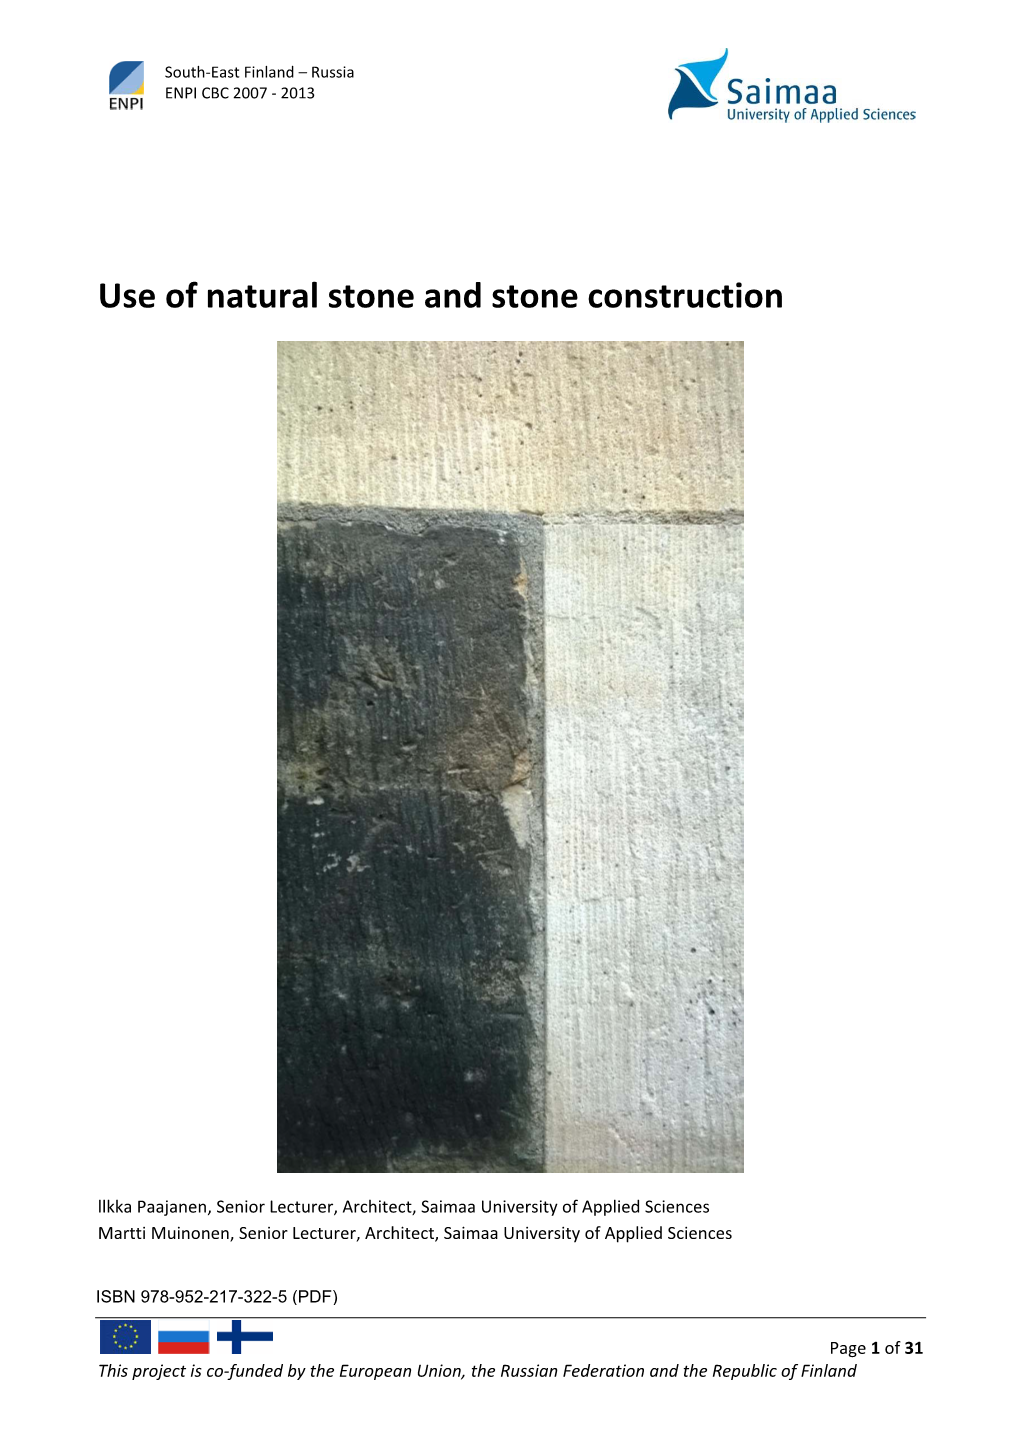 Use of Natural Stone and Stone Construction